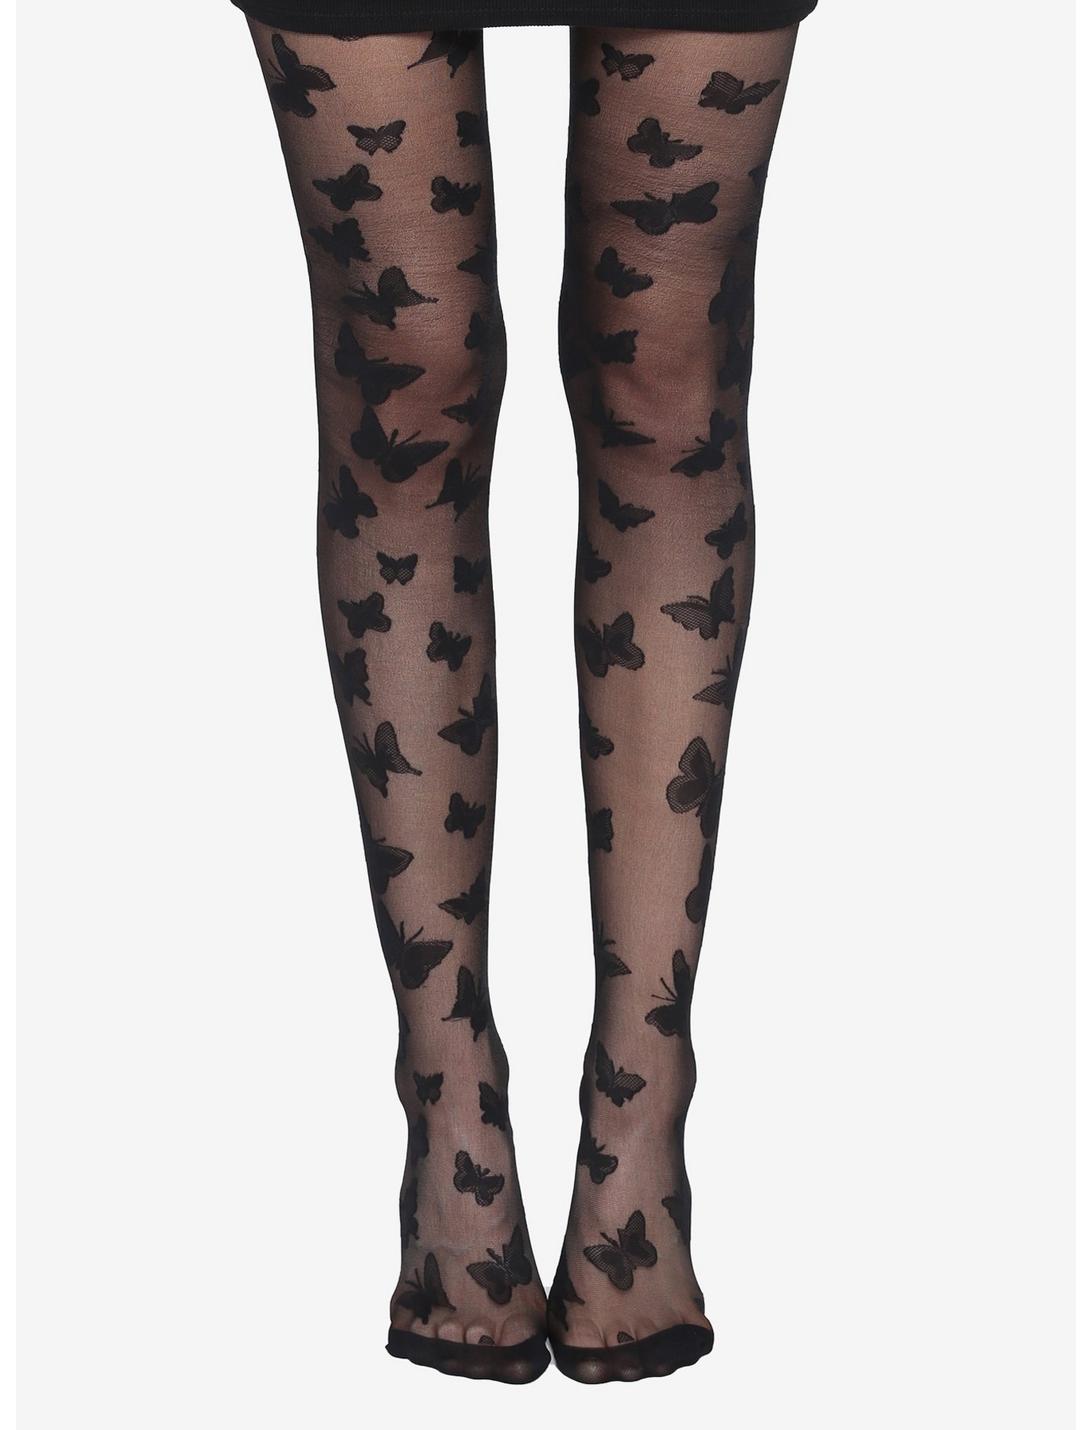 Hot Topic Punk Athletic Tights for Women